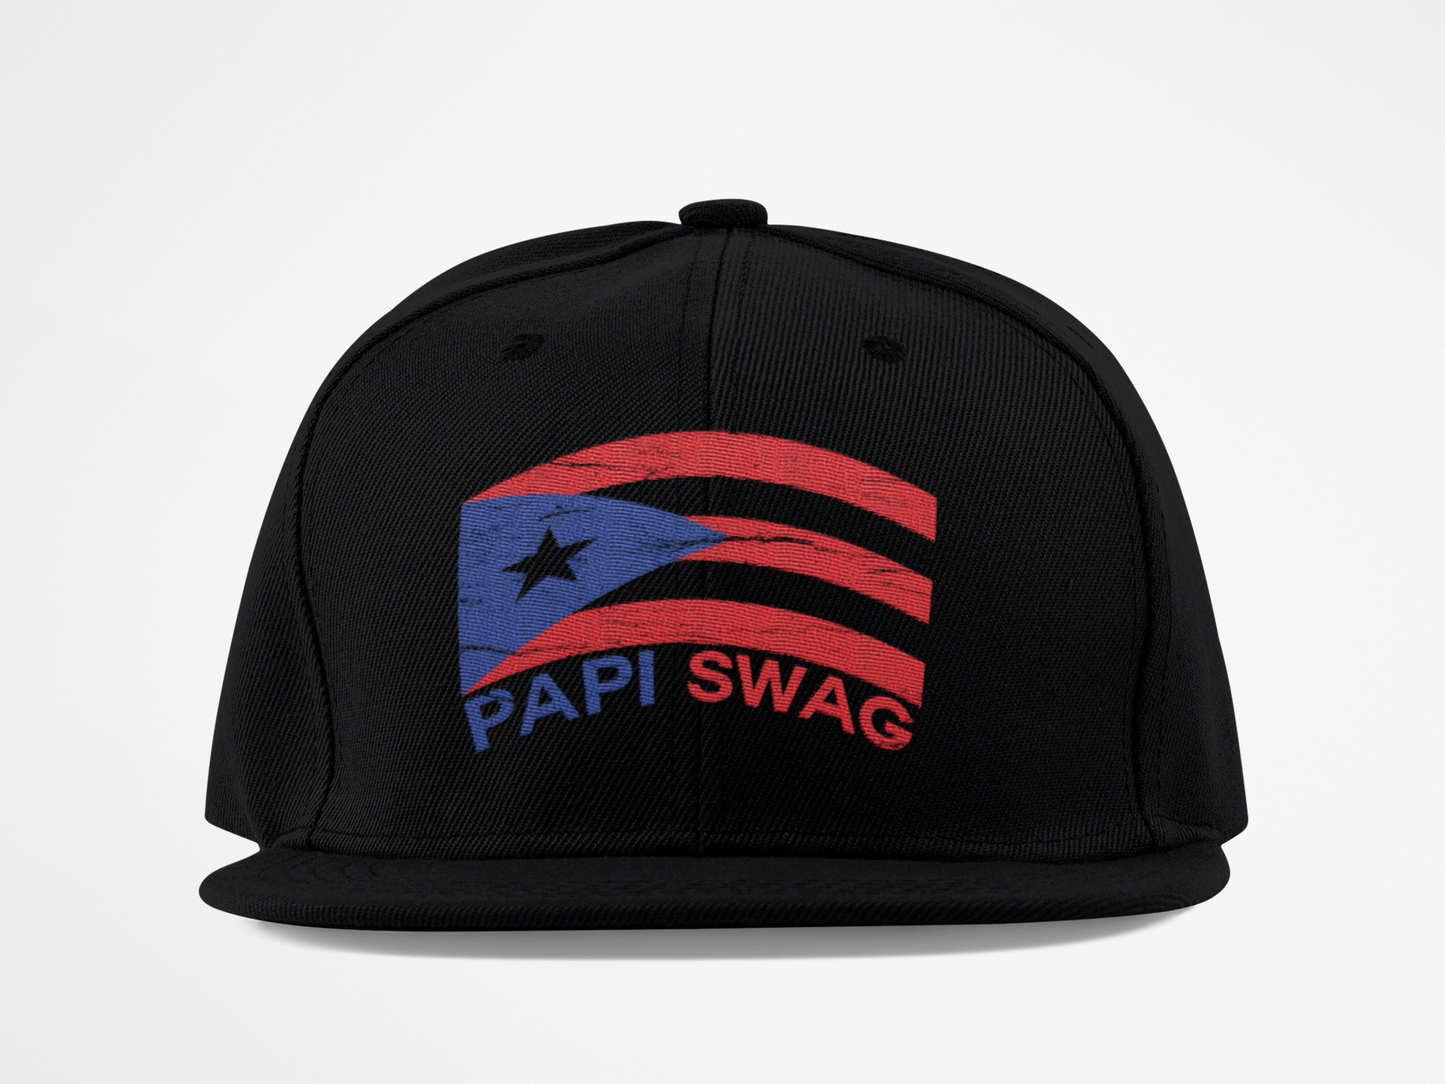 Daddy Swag Papi Swag Snap-back